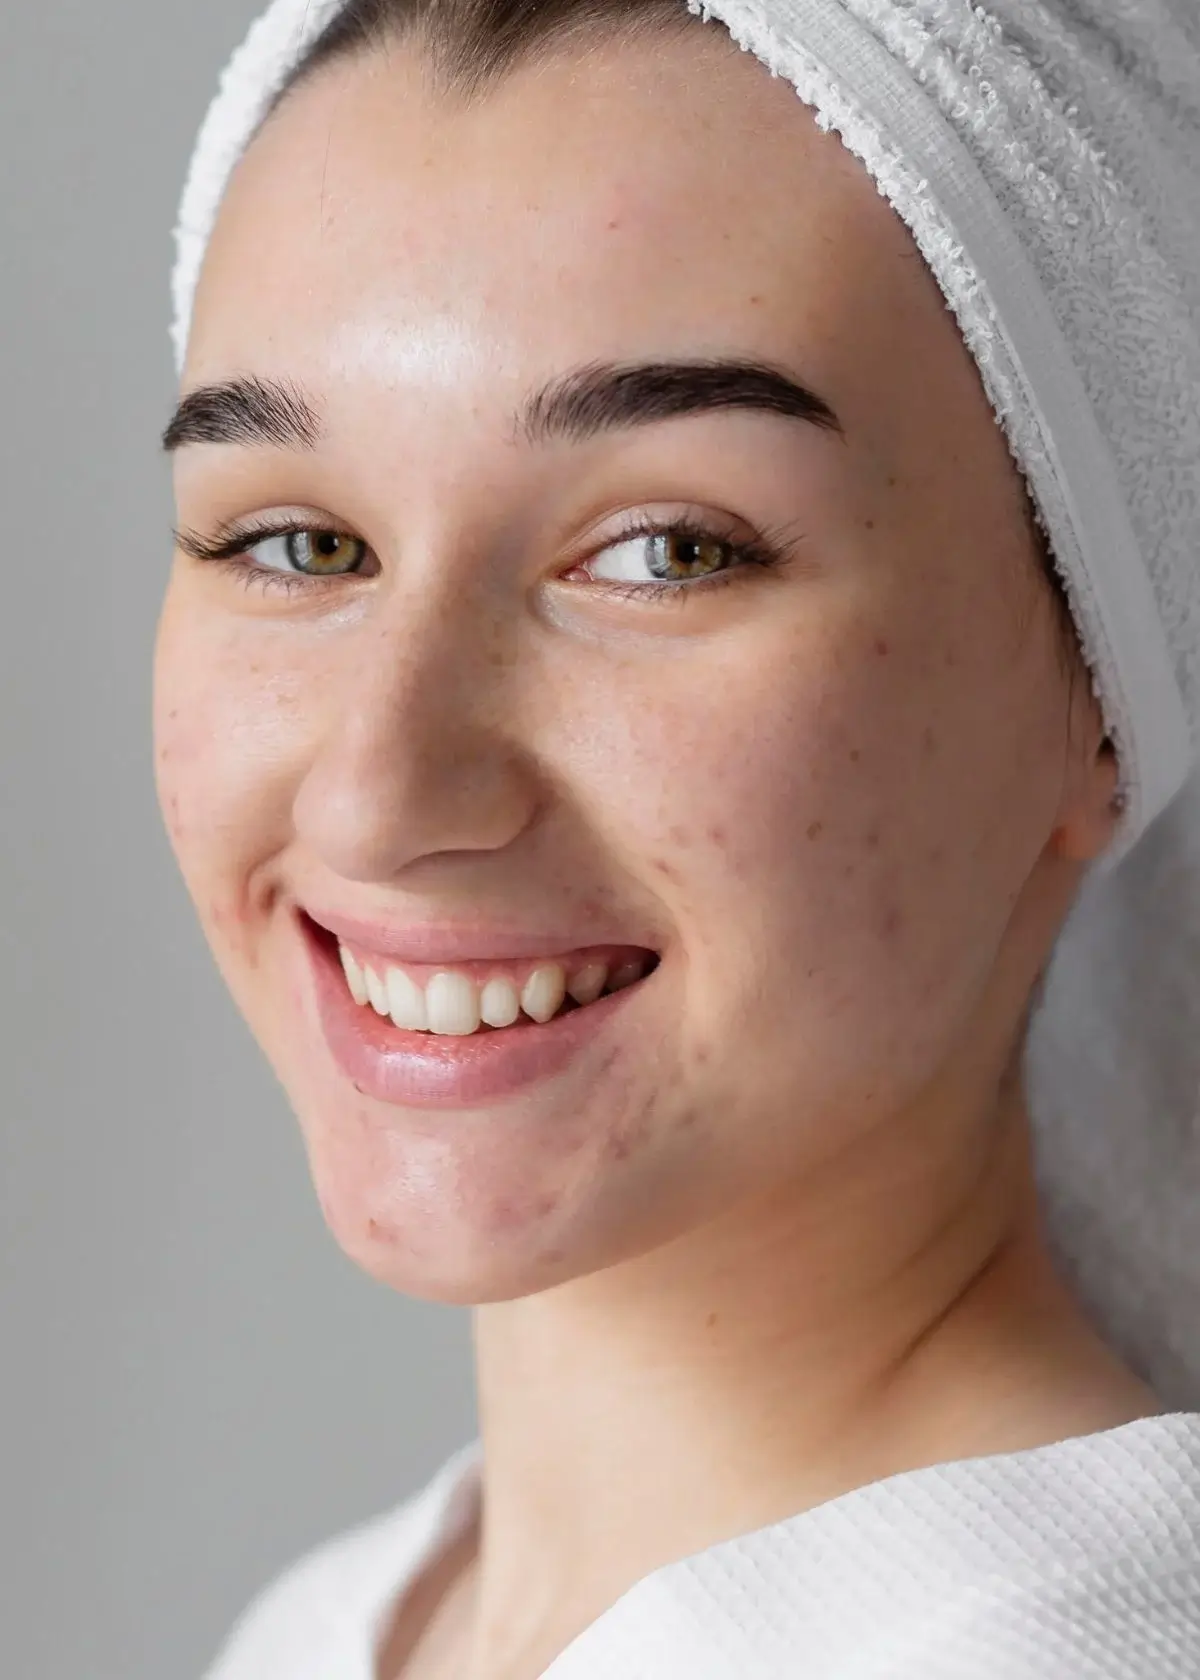 How to choose the right primer for large pores and acne scars?